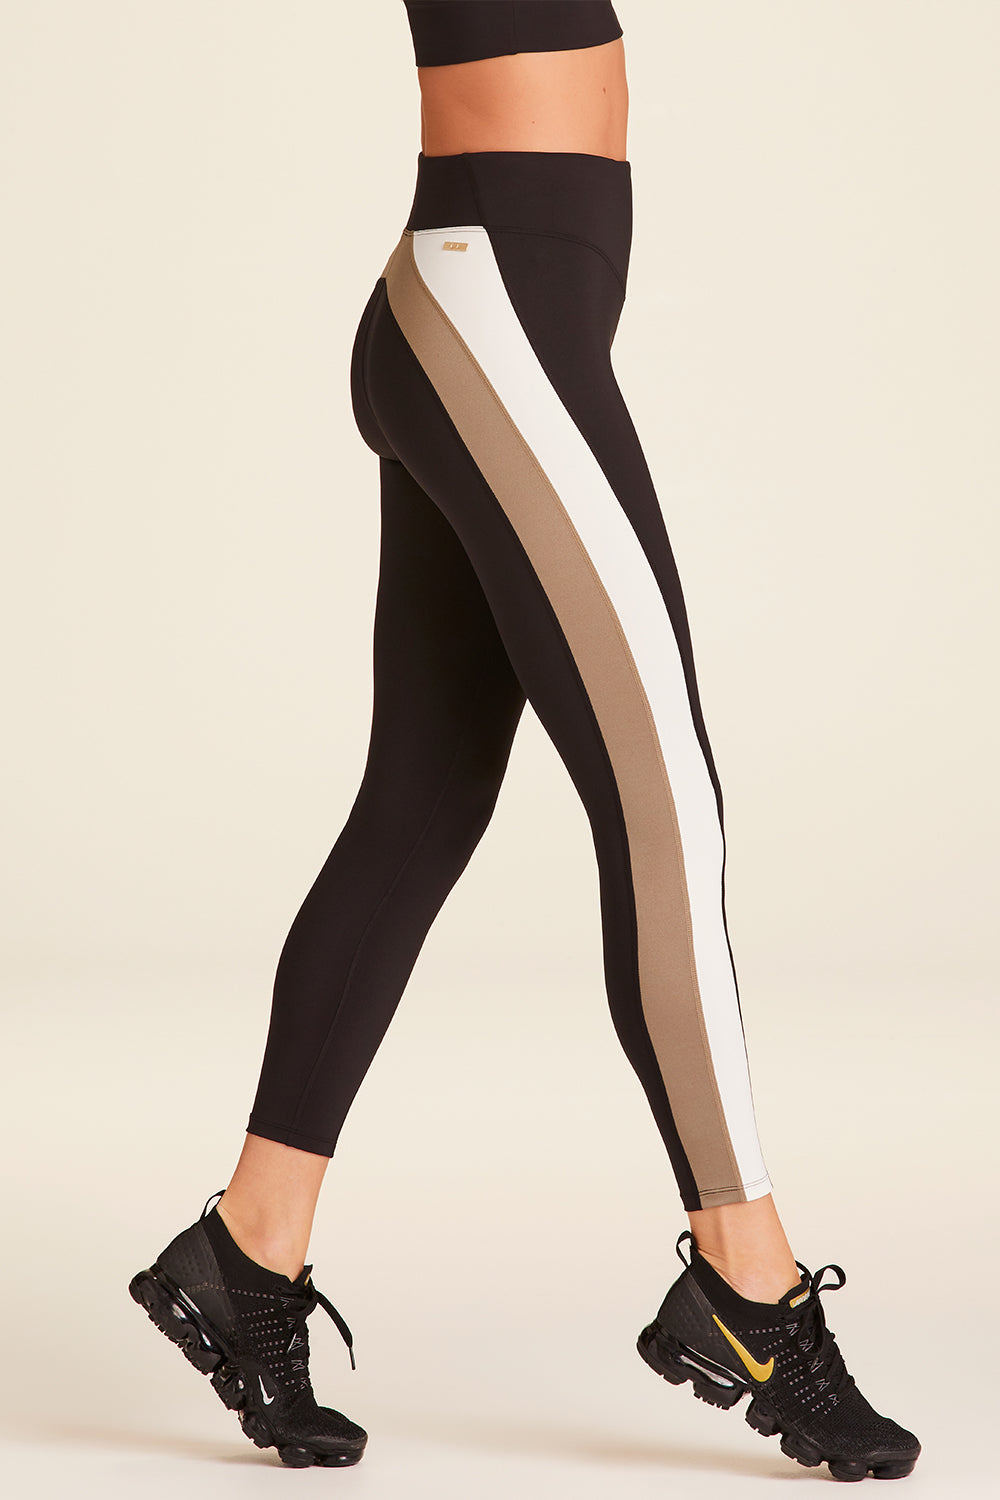 Side view of Alala Luxury Women's Athleisure bolt tight in black, gold, and bone